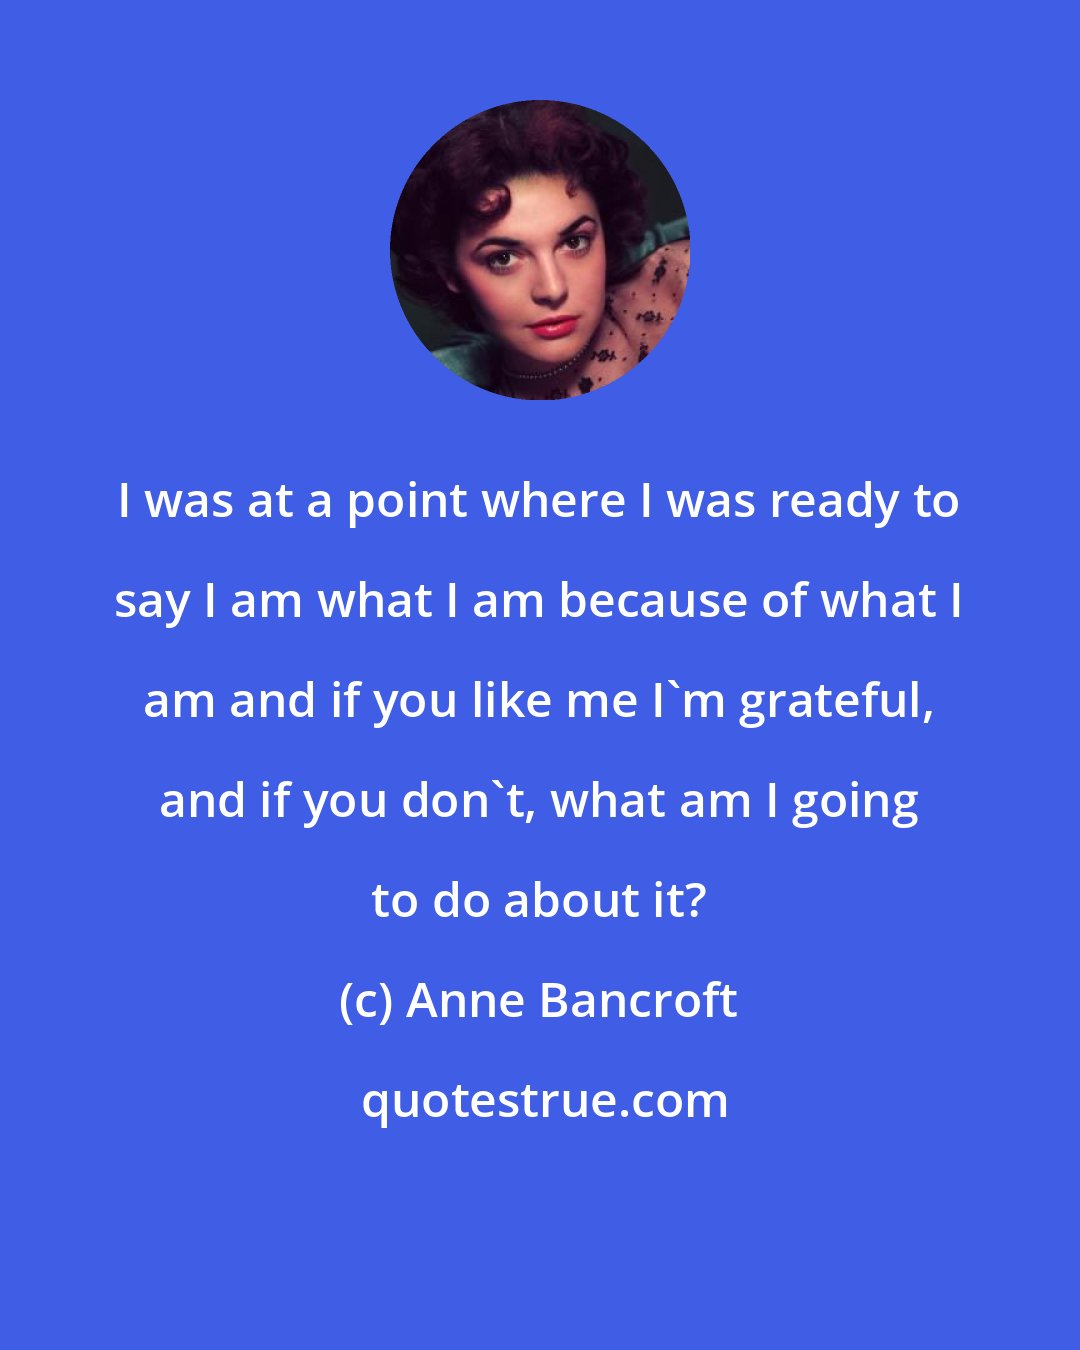 Anne Bancroft: I was at a point where I was ready to say I am what I am because of what I am and if you like me I'm grateful, and if you don't, what am I going to do about it?